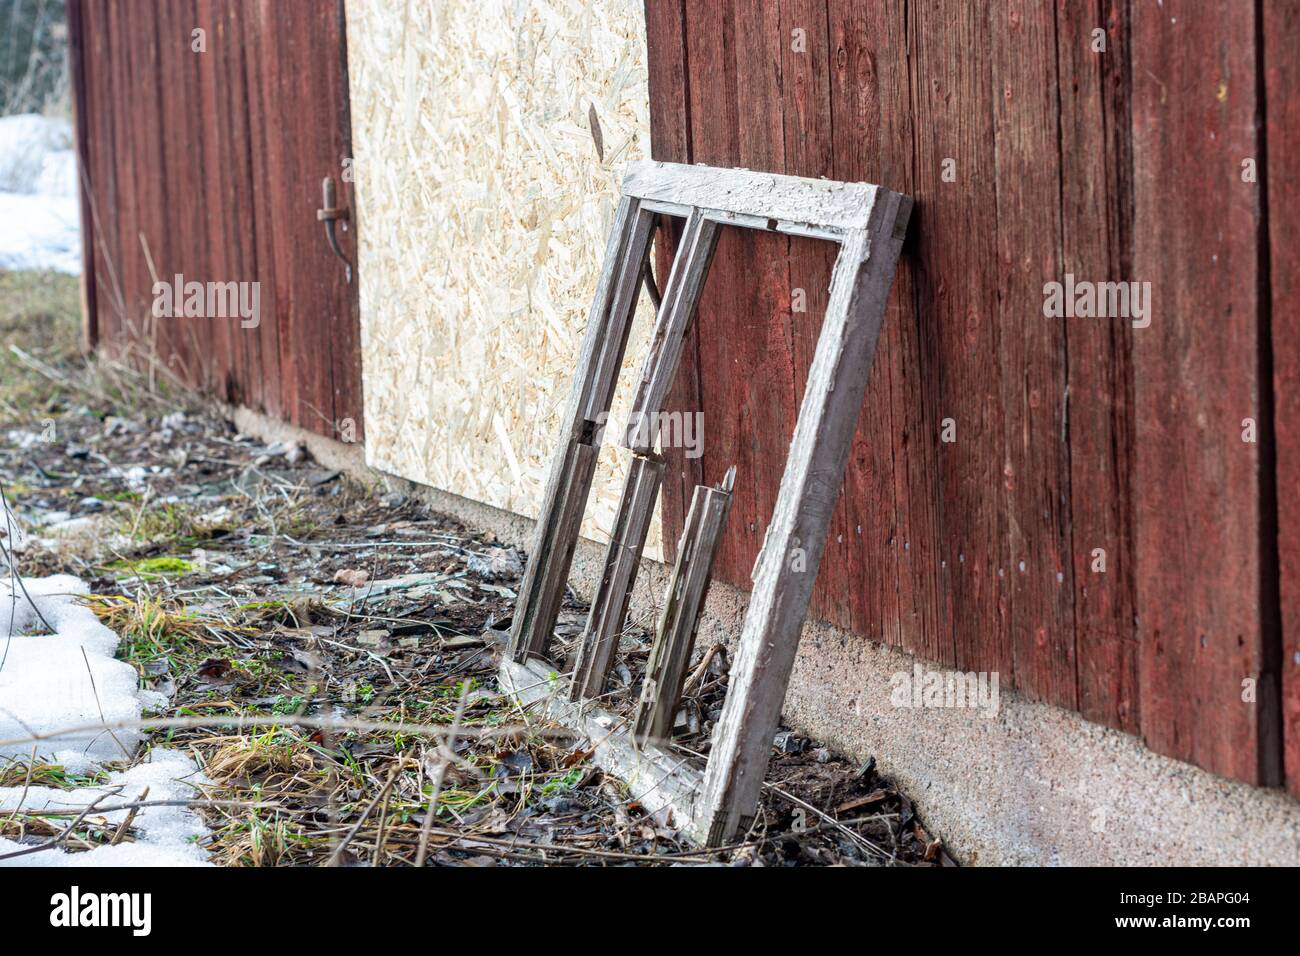 old wooden window frame near a wooden house Stock Photo